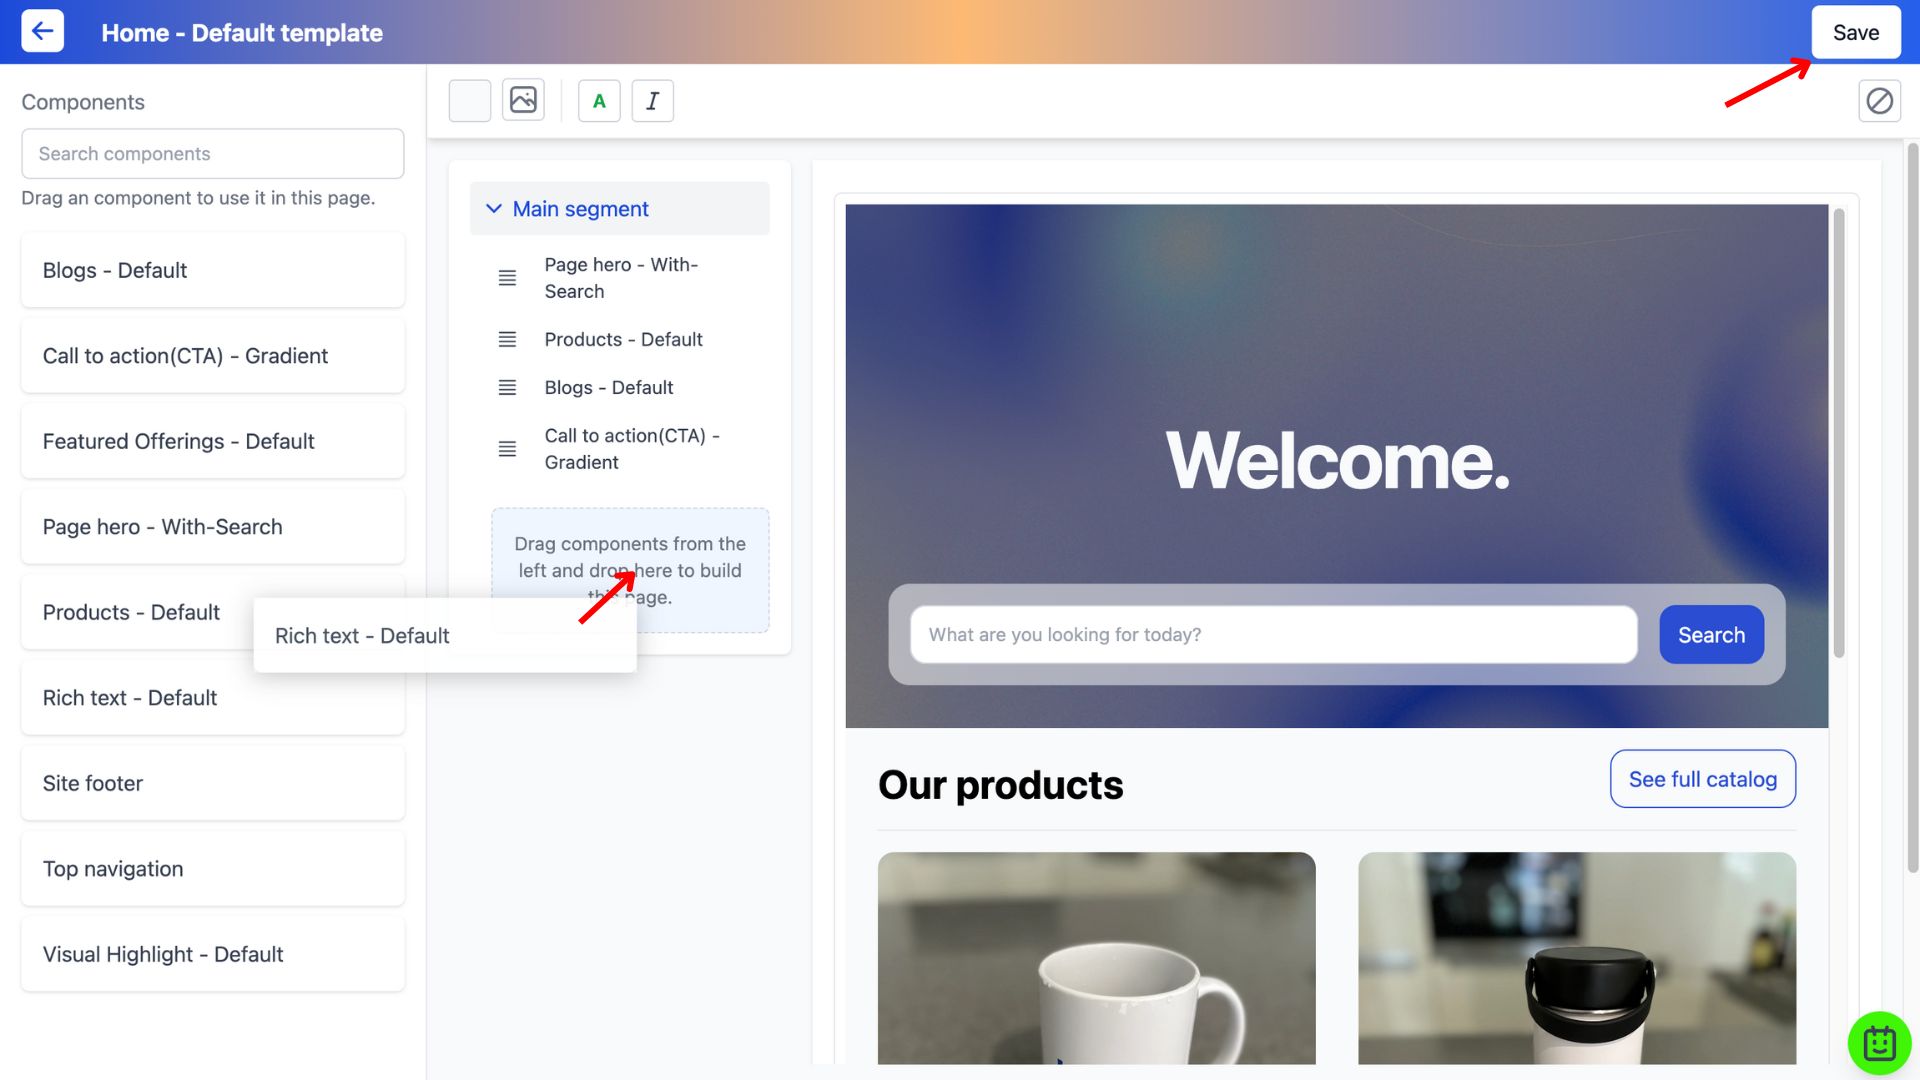 Drag and drop interface of the page builder